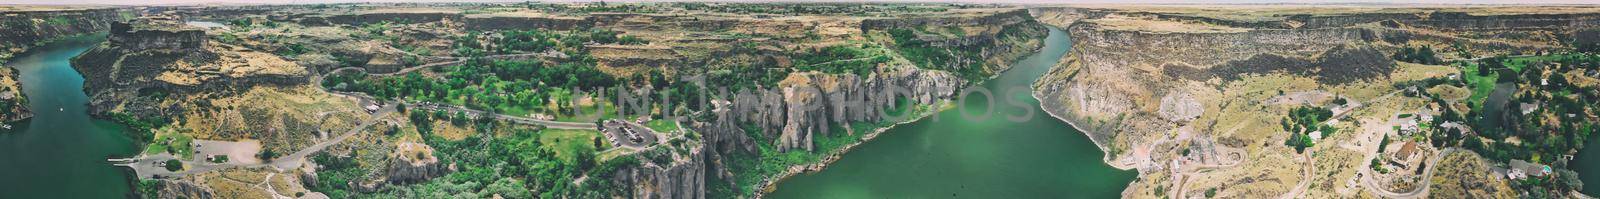 Aerial view of Shoshone Falls in summer season from drone viewpoint, Idaho, USA by jovannig